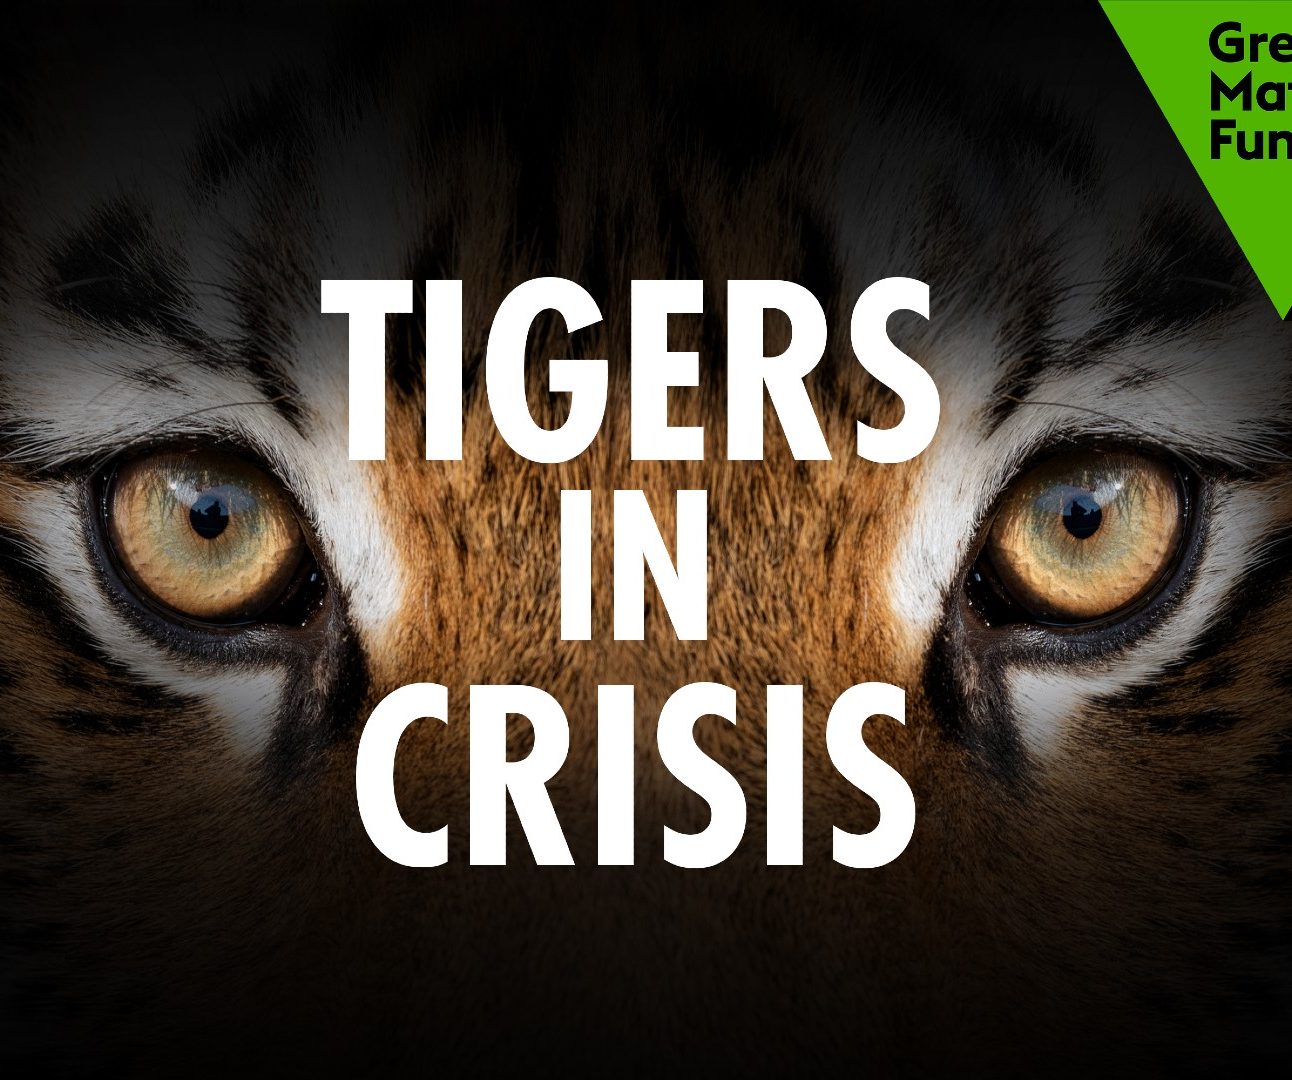 A black banner with a close-up of tiger's eyes and the text 'Tigers in Crisis' overlaid